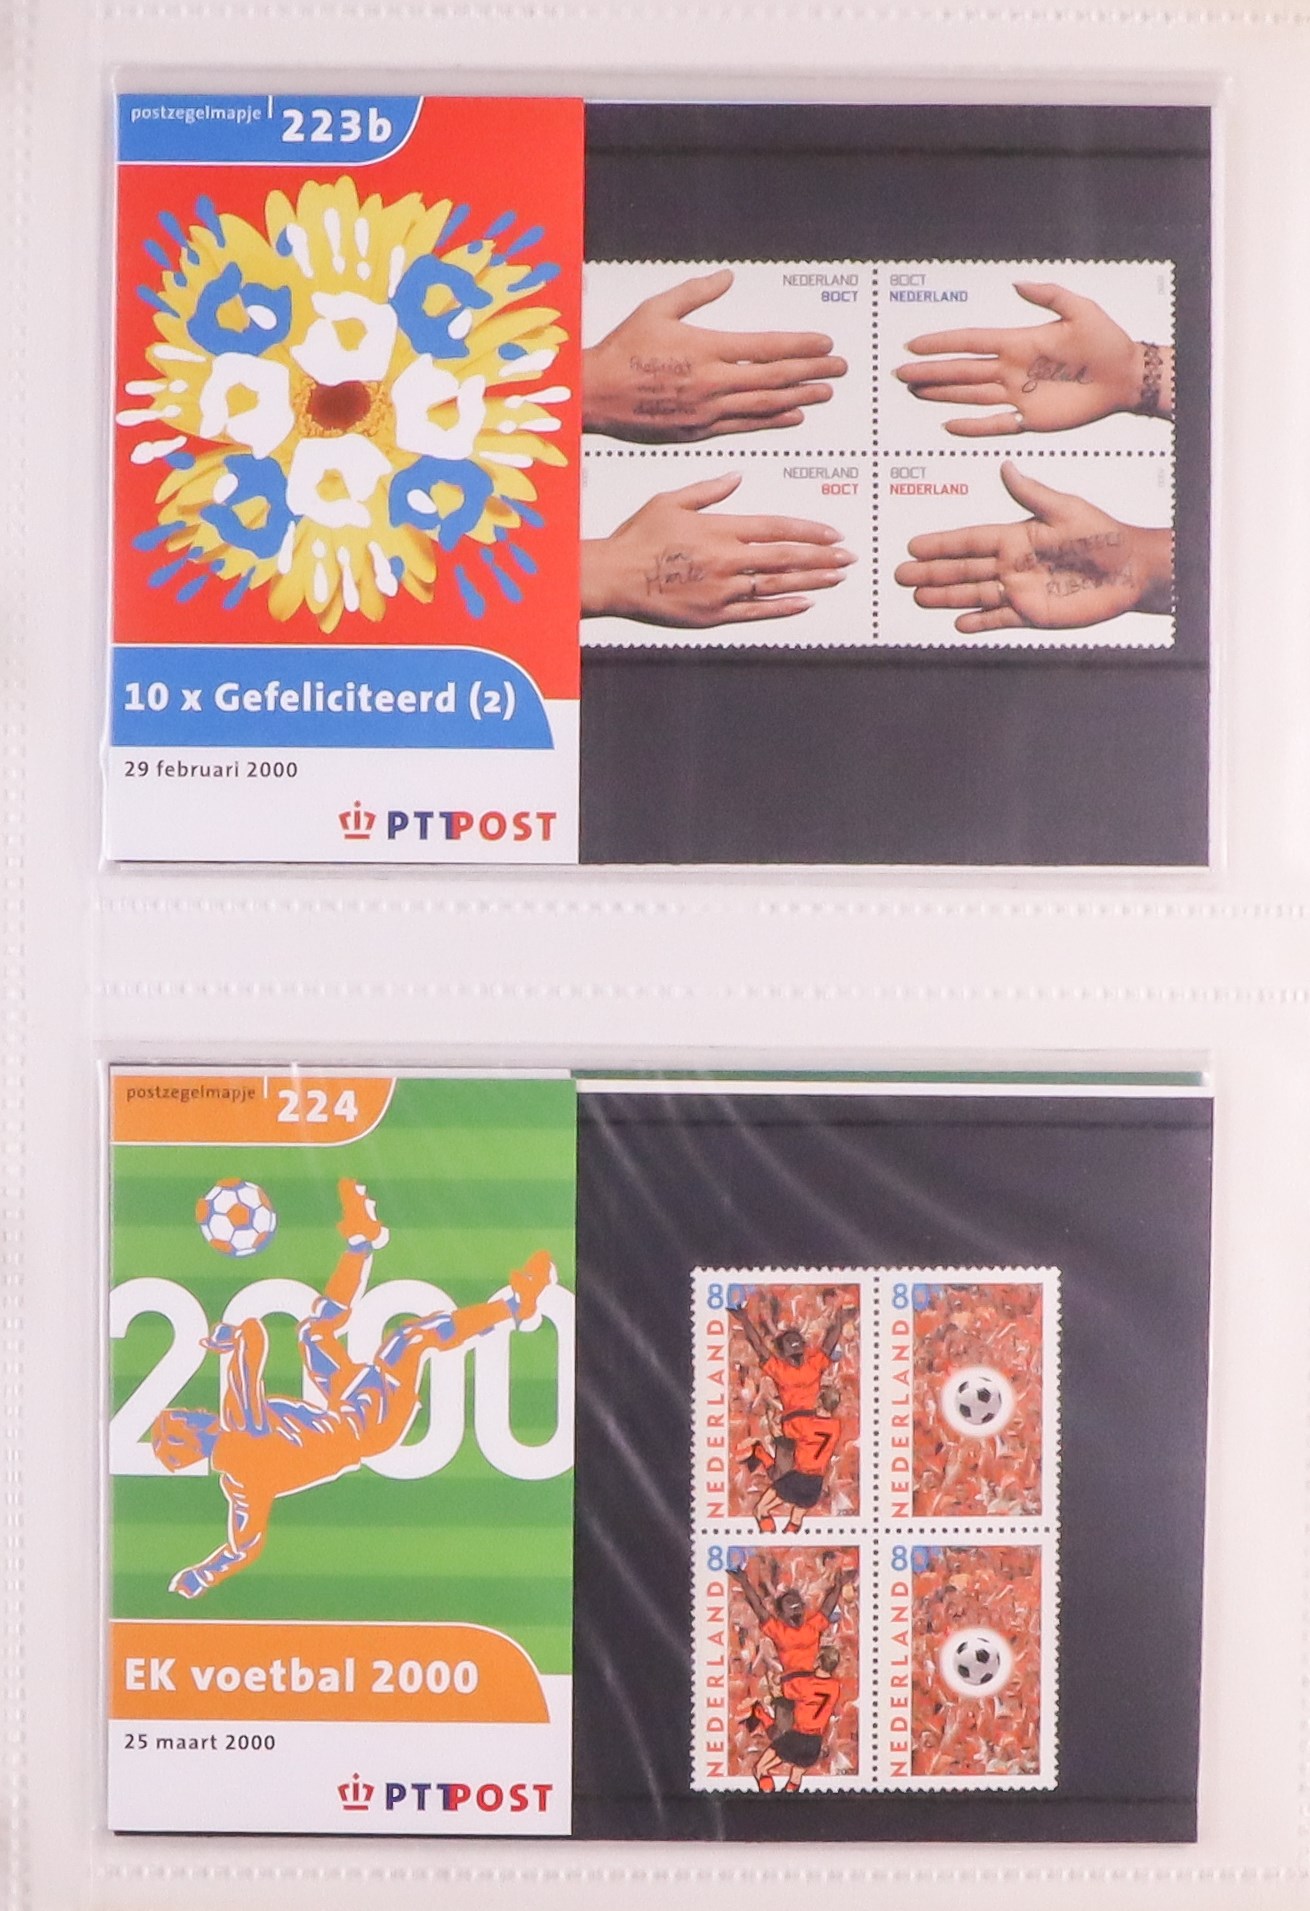 NETHERLANDS 1982-2001 PRESENTATION PACKS Complete run in five special albums, numbers 1 to 246b, - Image 2 of 9